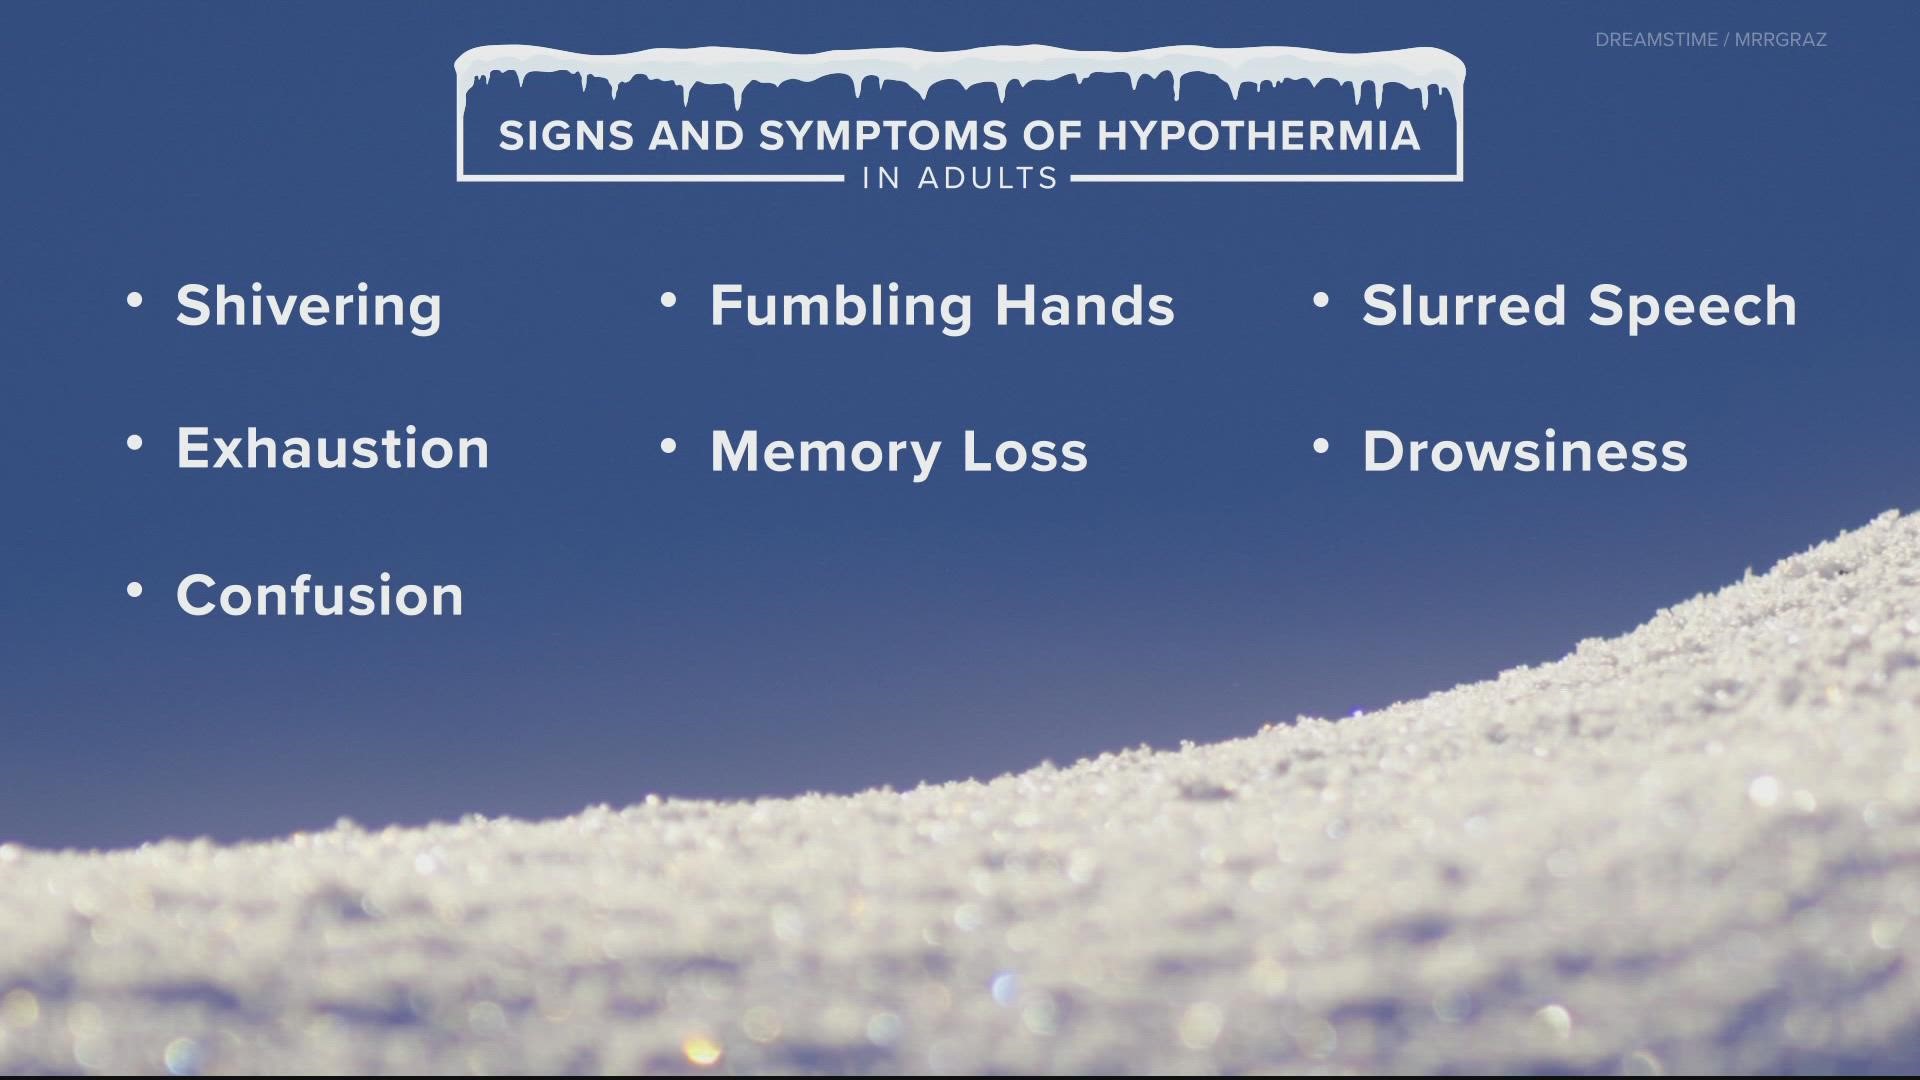 With temperatures plummeting as the day progresses, there are a few warning signs you'll want to be aware of.